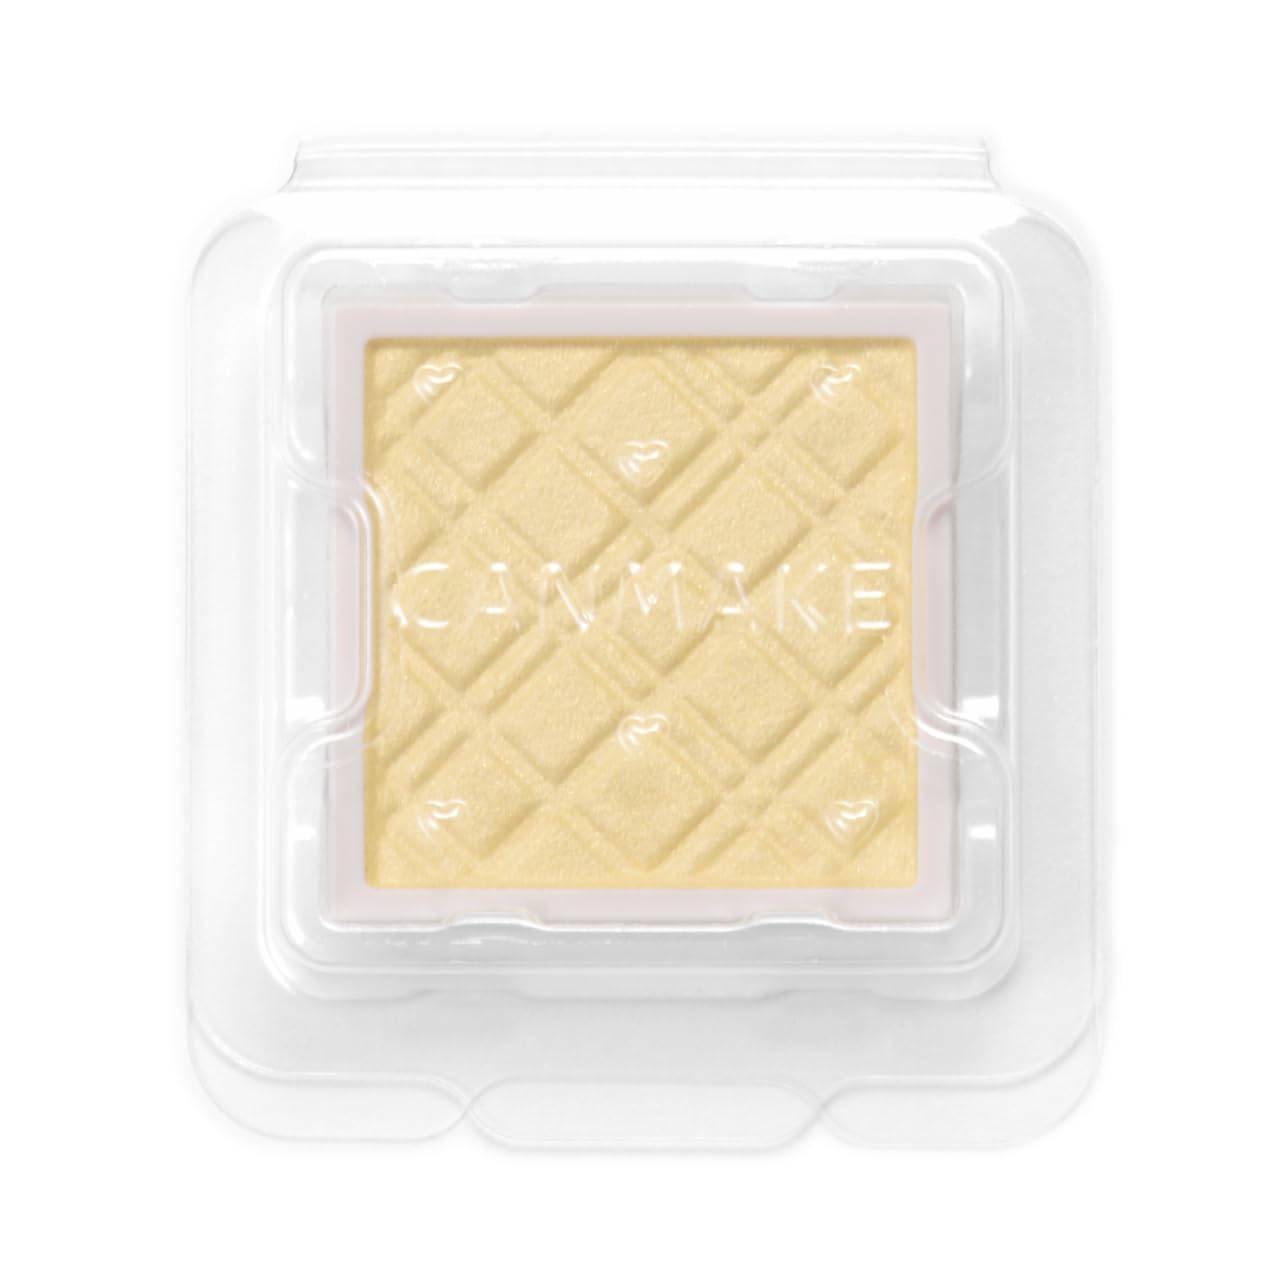 Canmake My Tone Couture Face Color Pearl Yellow Pt 02 Custard 1.5g